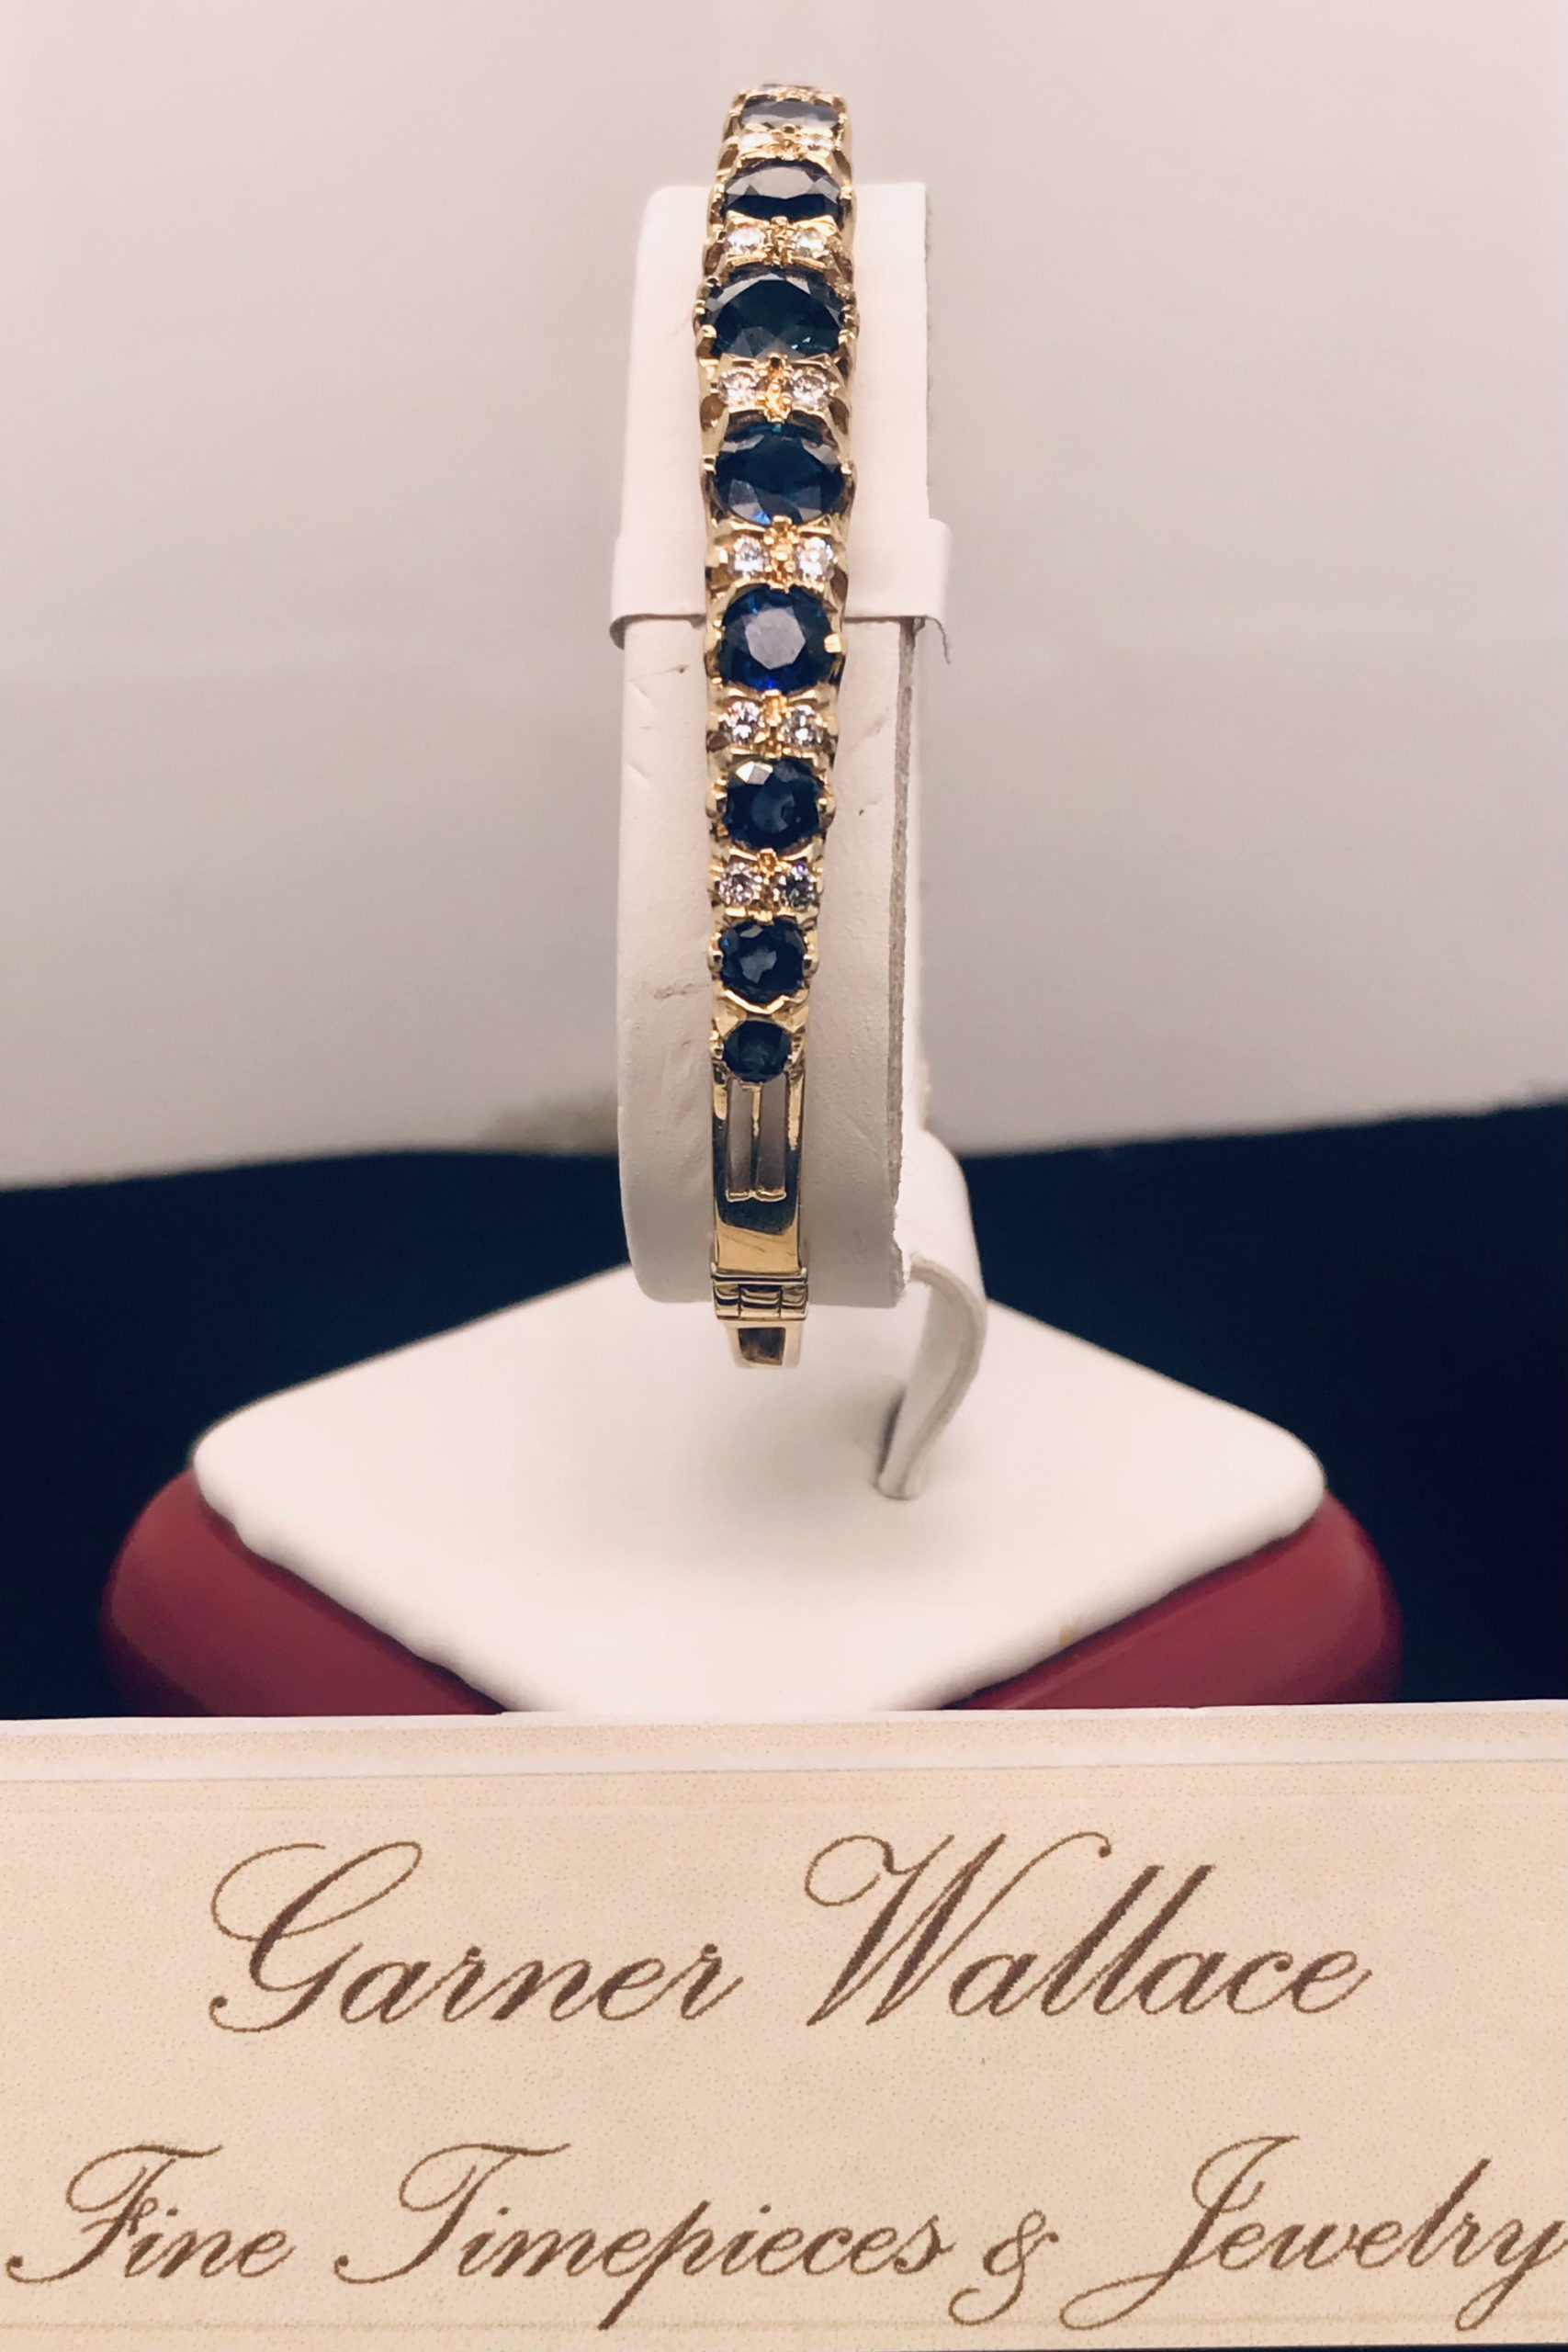 Stunning Chunky Yellow Gold and Cabochon Sapphire Bracelet from Annabel  Jones | eBay